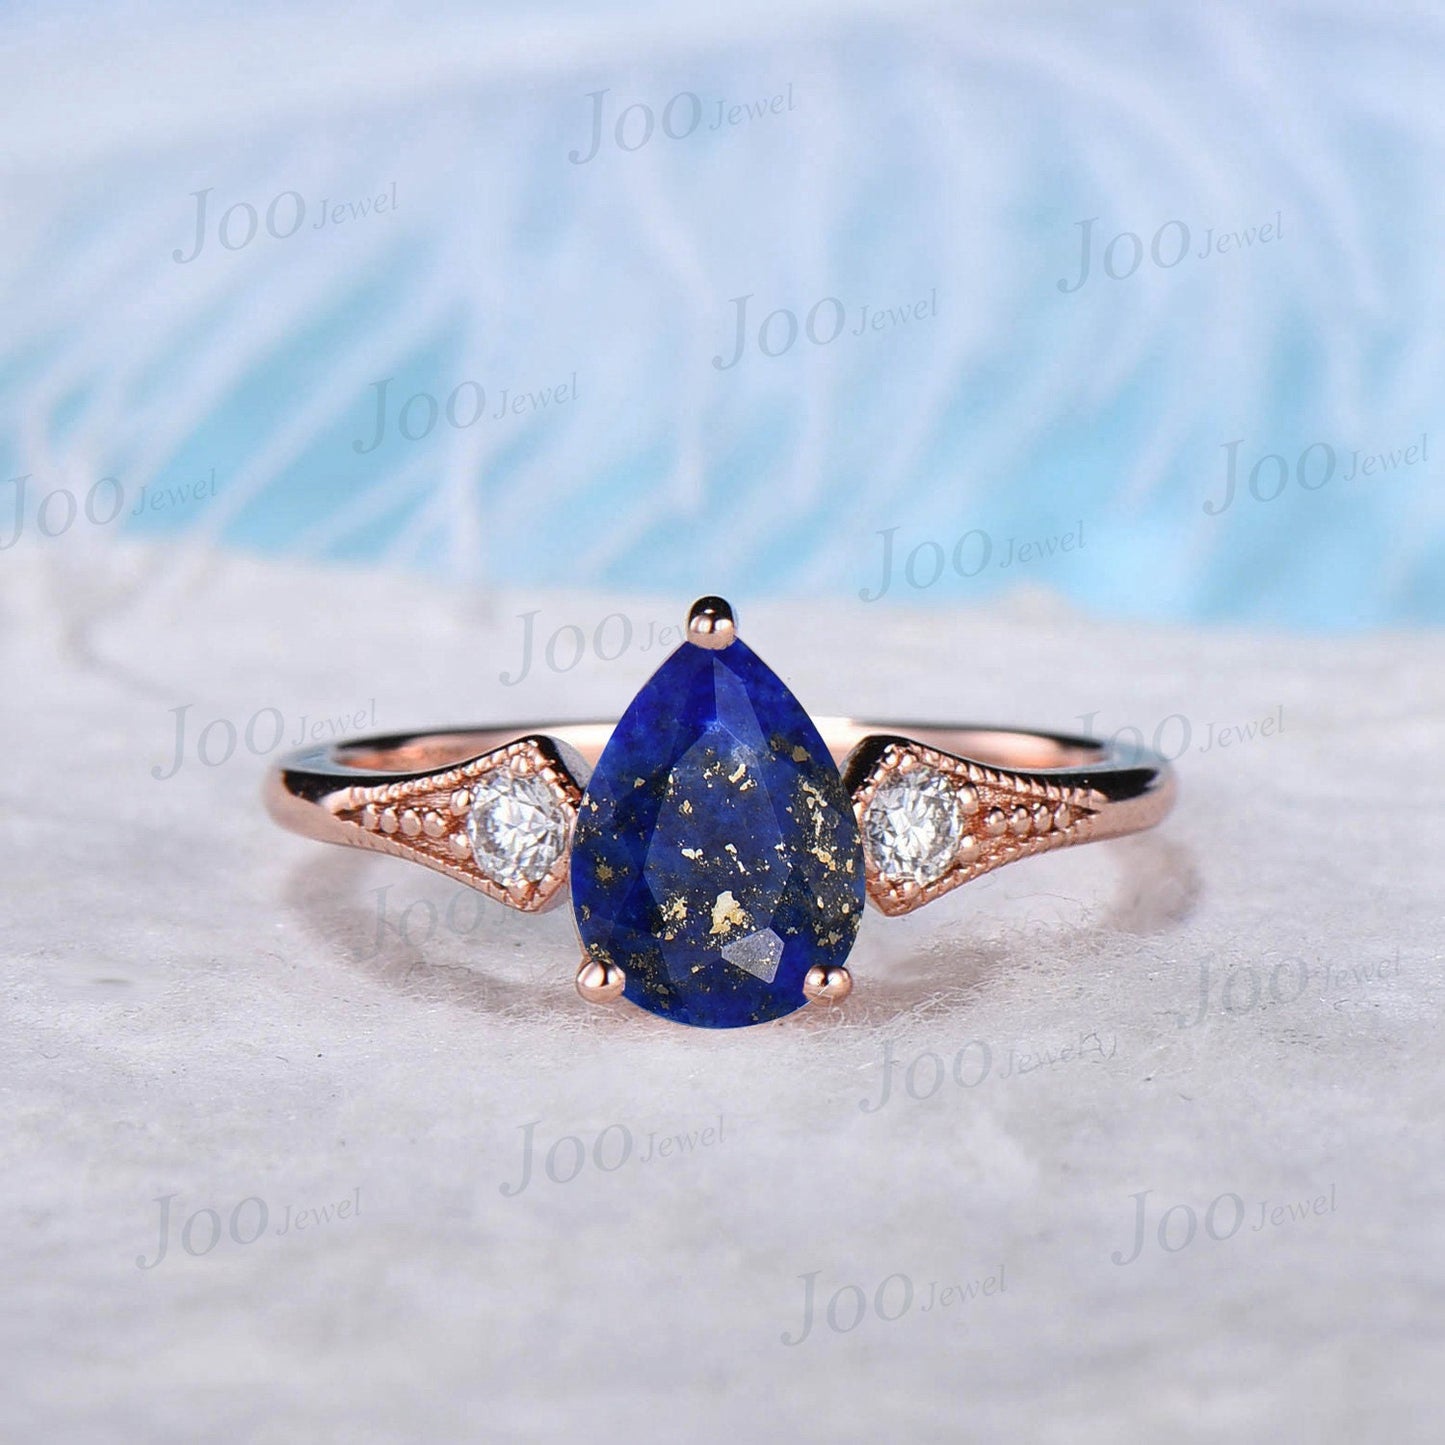 1.25ct Pear Shaped Natural Lapis Lazuli Solitaire Ring Set 14K Rose Gold Blue Sapphire Milgrain Wedding Ring Blue Lapis Jewelry Antique Gift